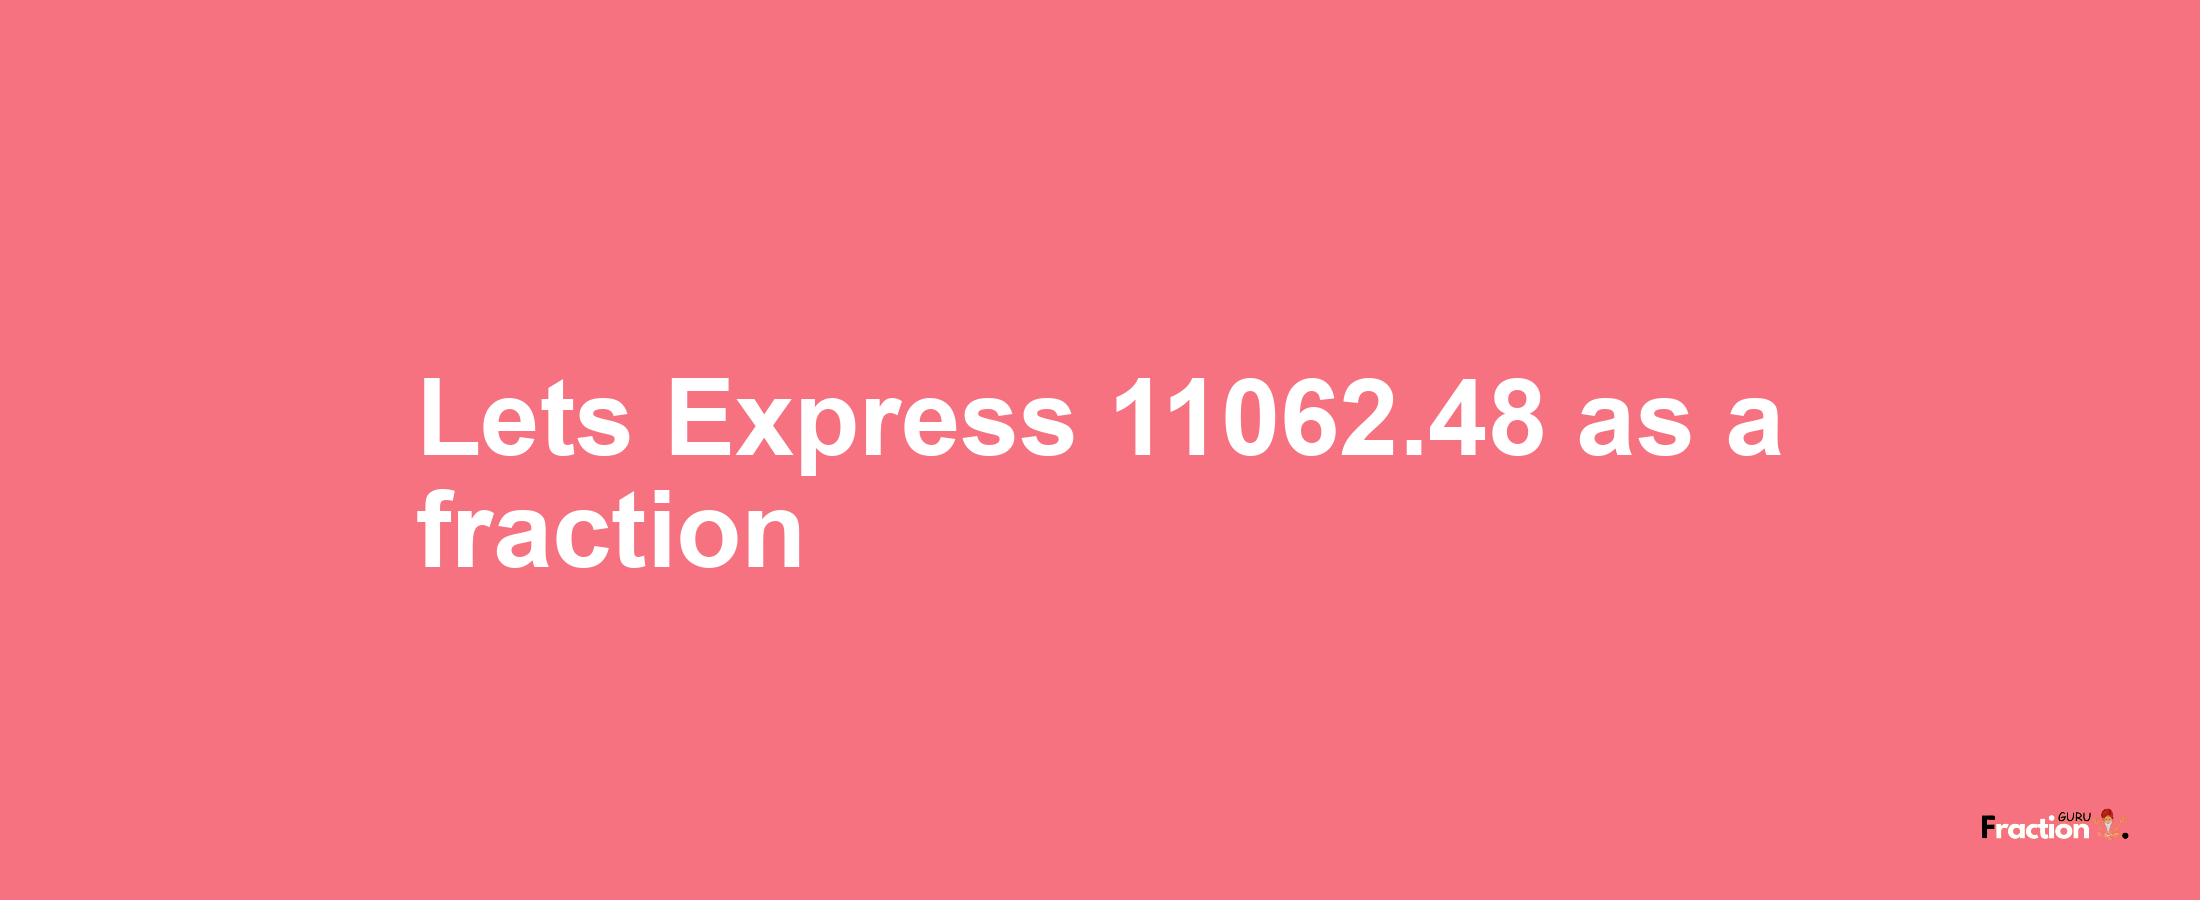 Lets Express 11062.48 as afraction